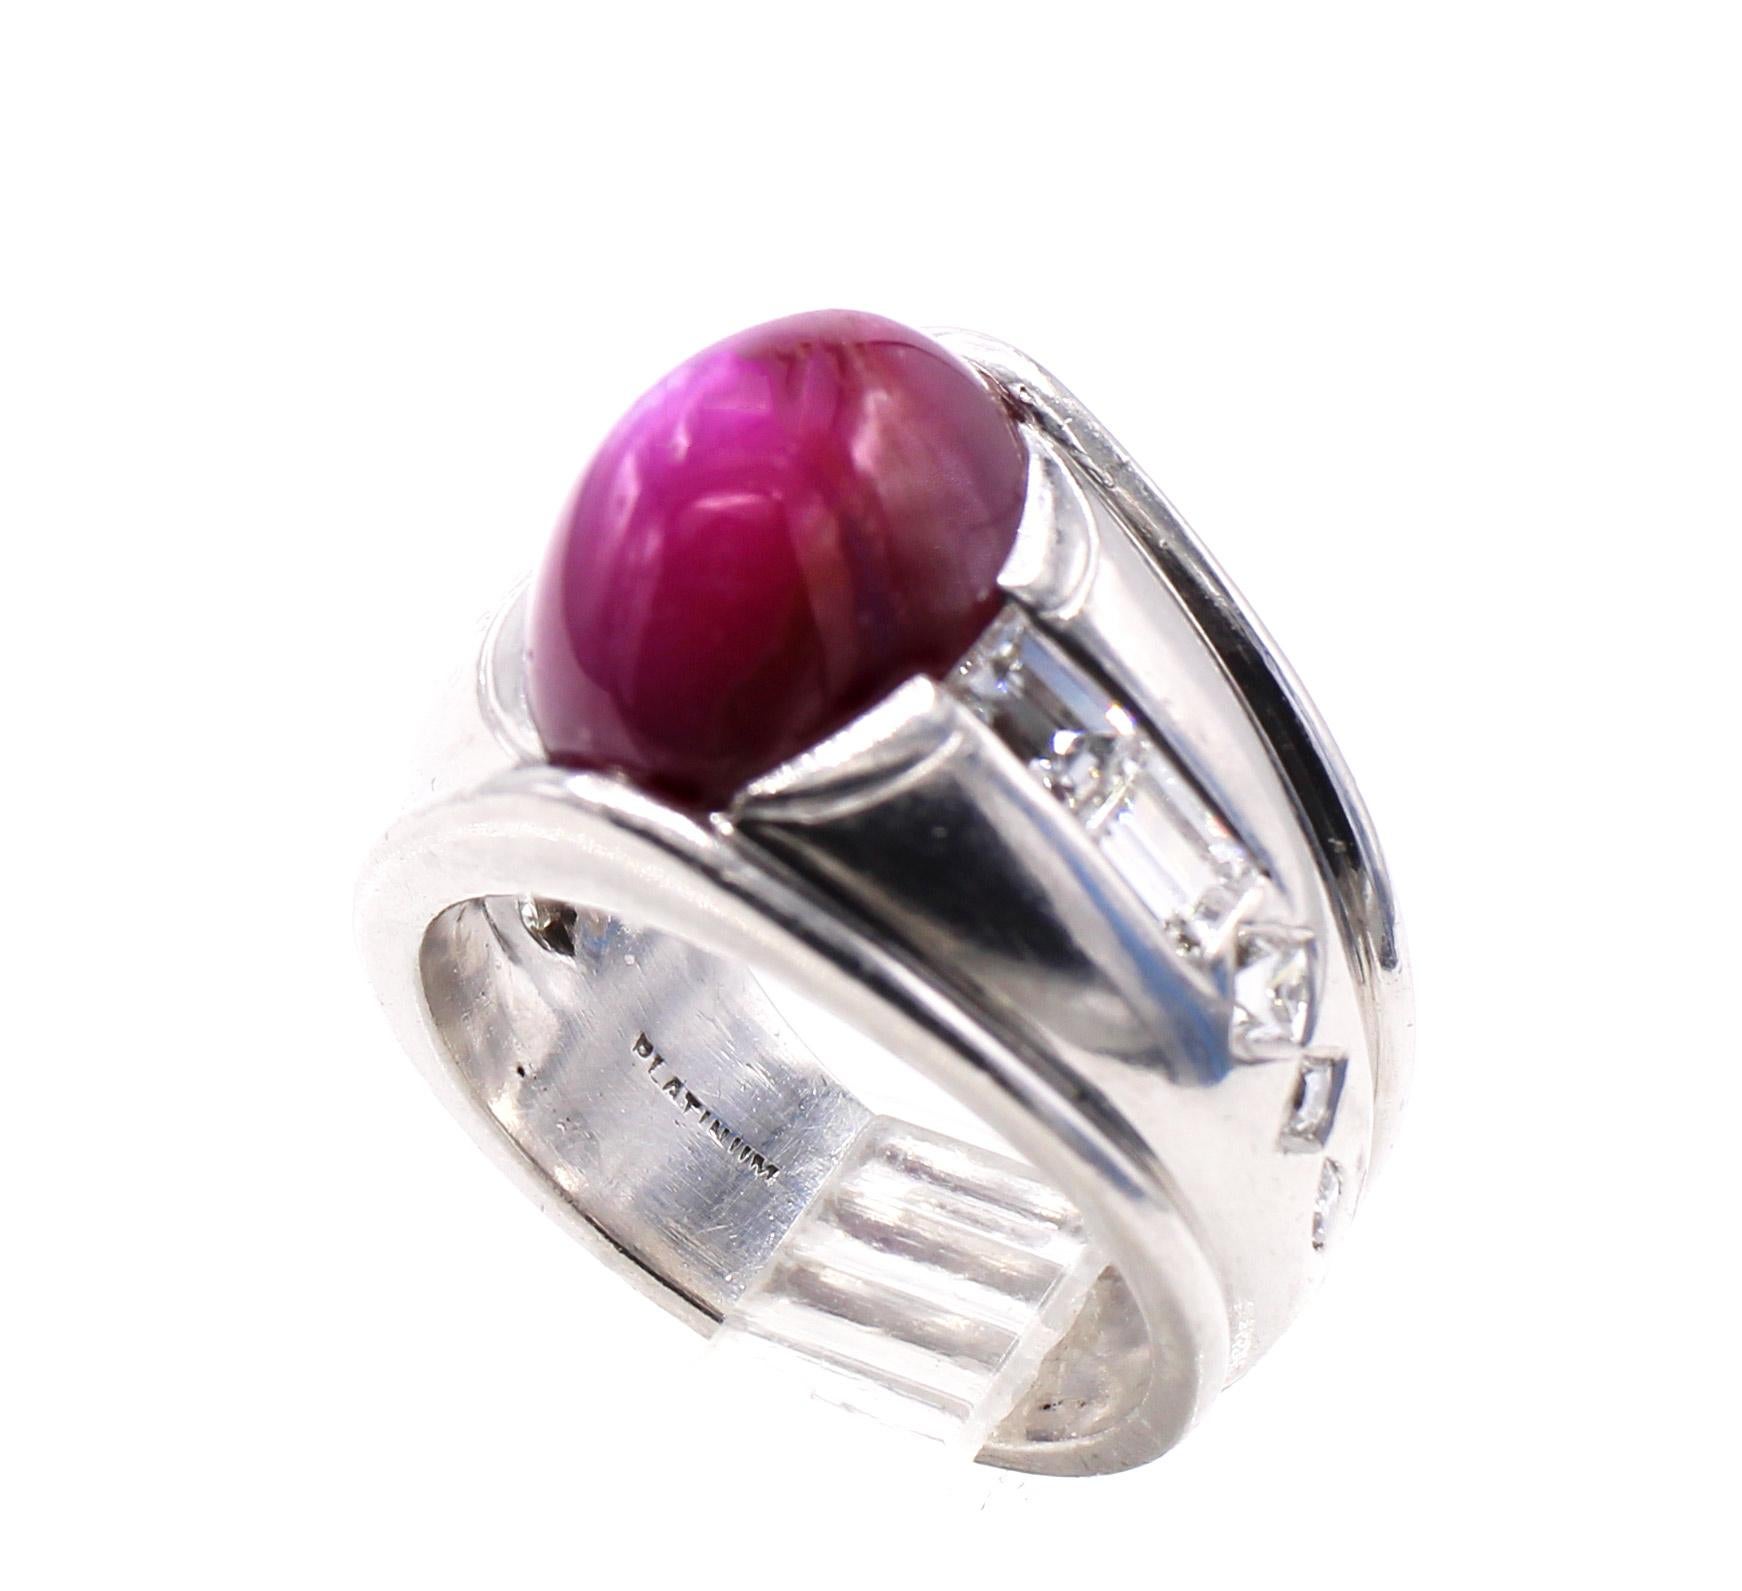 Beautifully hand made platinum band from ca 1940 featuring an oval cabochon star ruby measured to weigh approximately 8.5 carats. The dome shaped ruby displays a wonderful 6 legged star when light hits the surface. Set in a heavy bezel of platinum